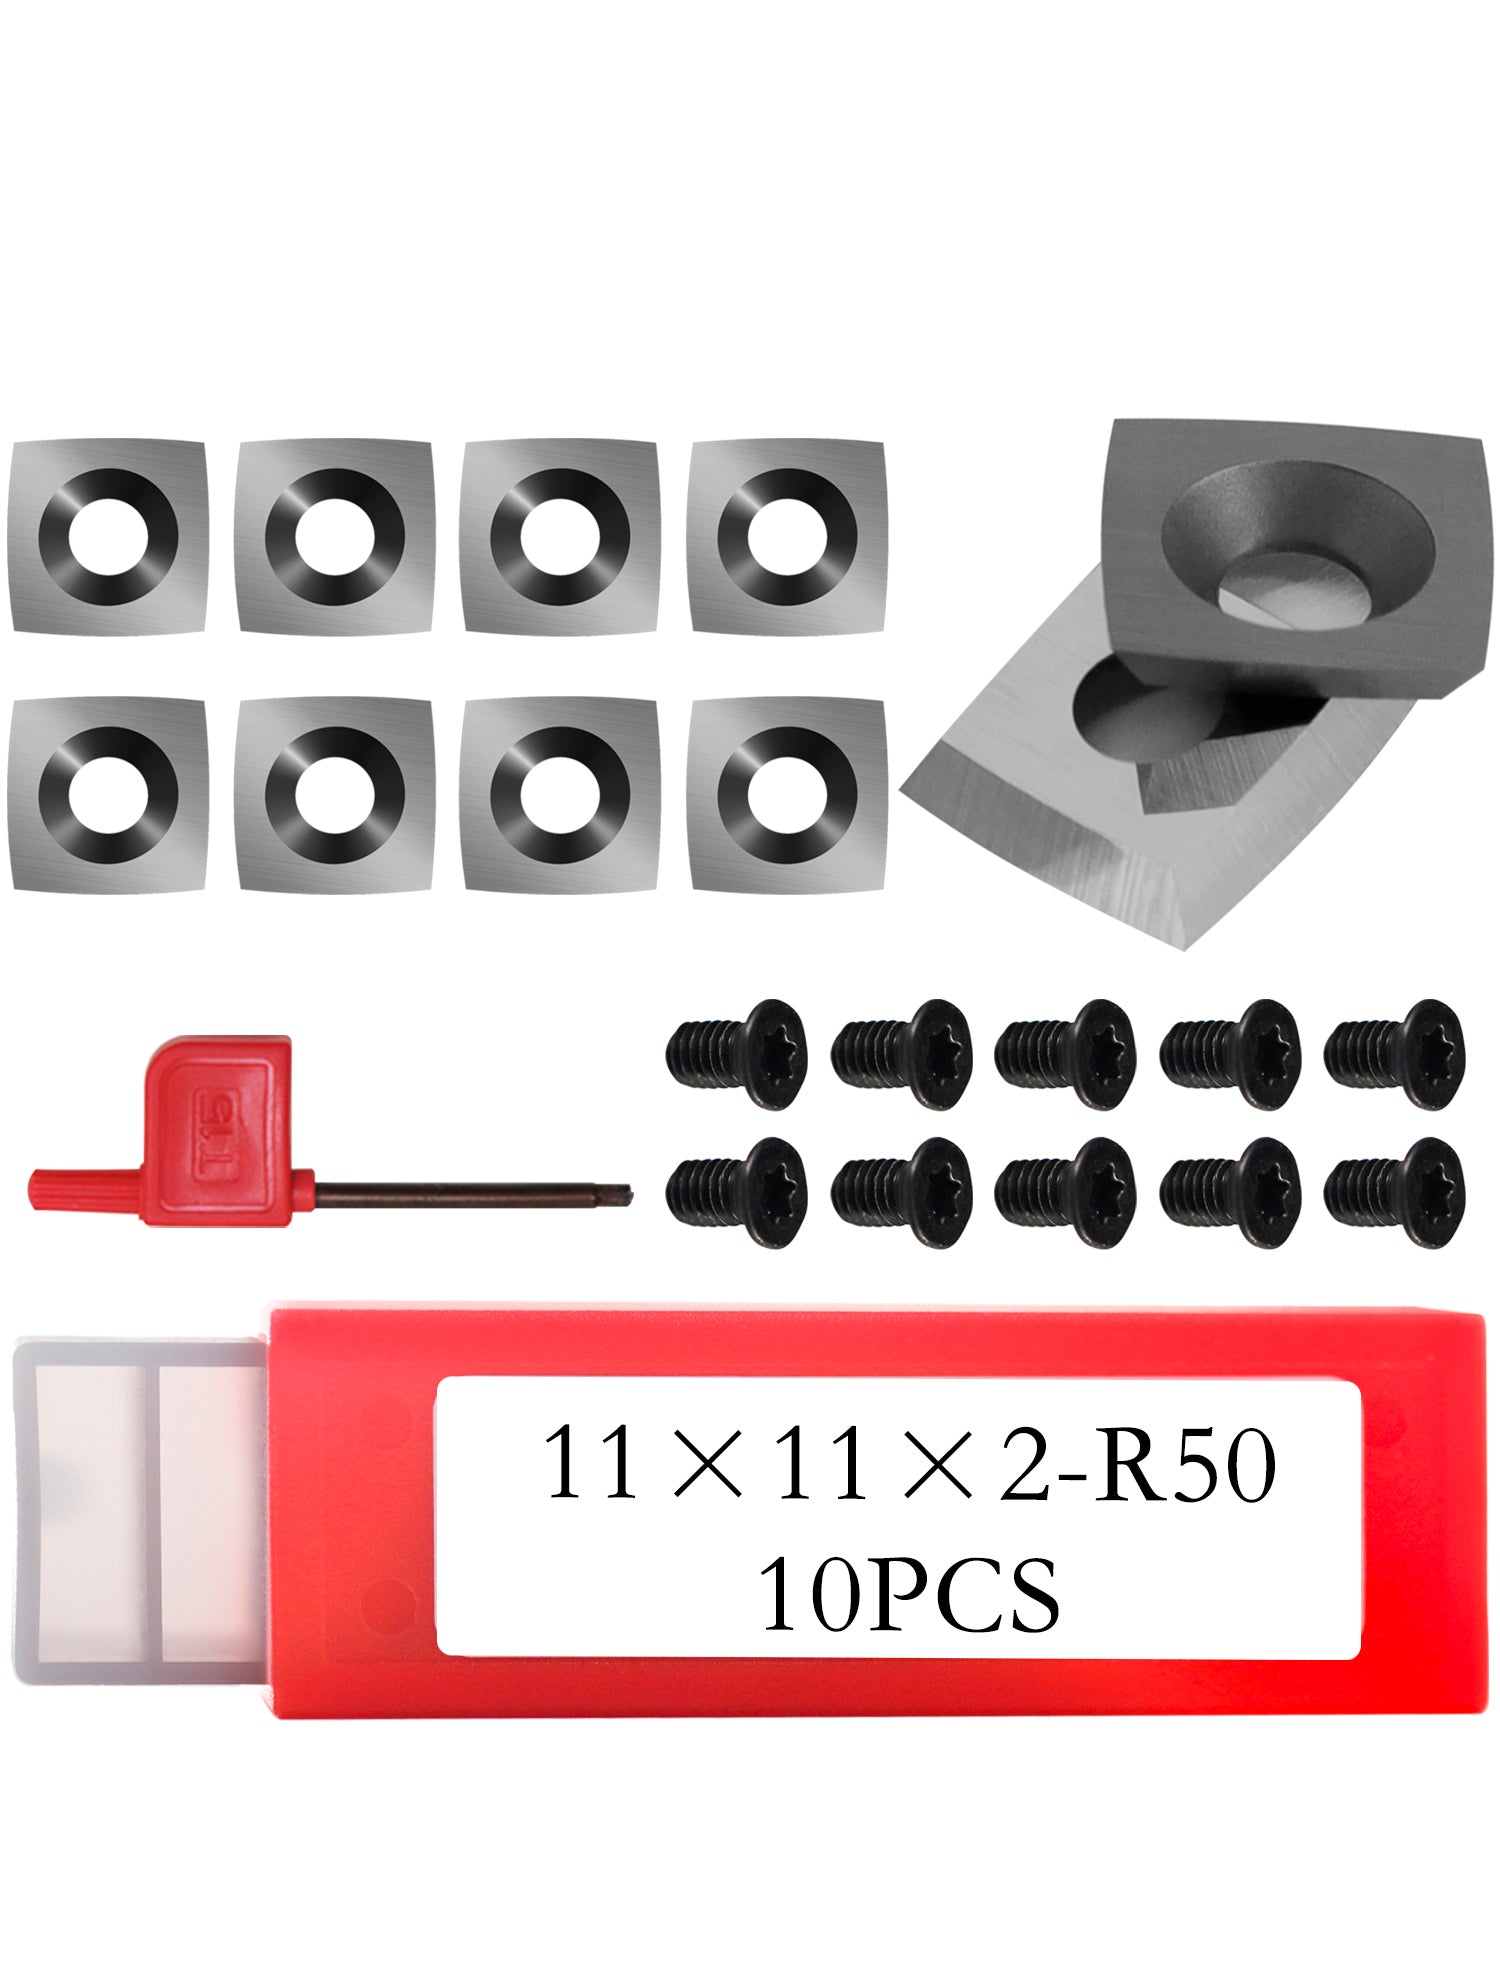 11mm square carbide replacement tips with radius 11x11x2mm-R50